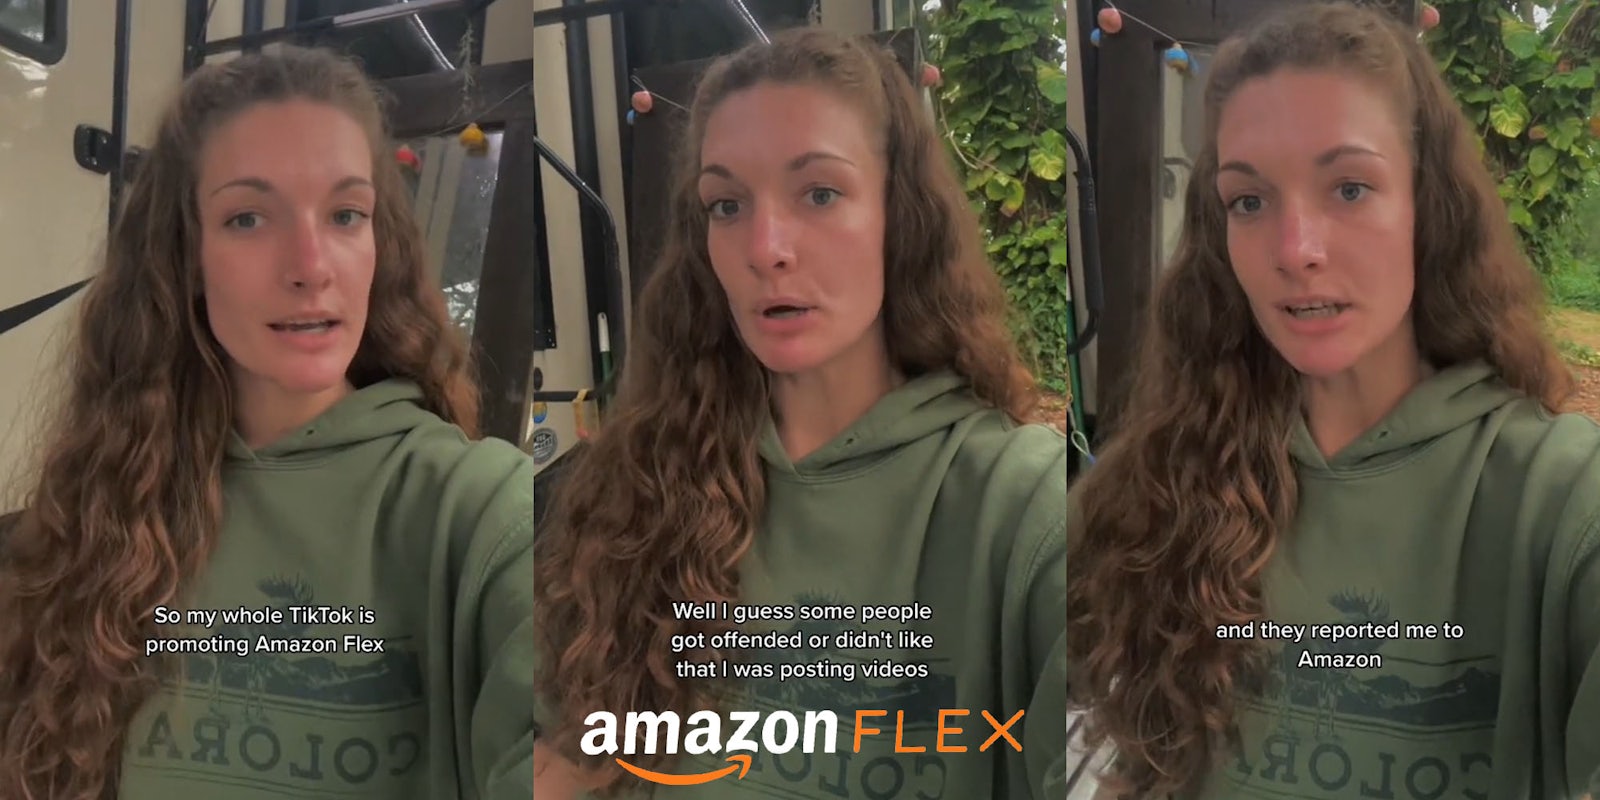 woman speaking outside caption 'So my whole TikTok is promoting Amazon Flex' (l) woman speaking outside caption 'Well I guess some people got offended or didn't like that I was posting videos' with Amazon Flex logo centered at bottom (c) woman speaking outside caption 'and they reported me to Amazon' (r)